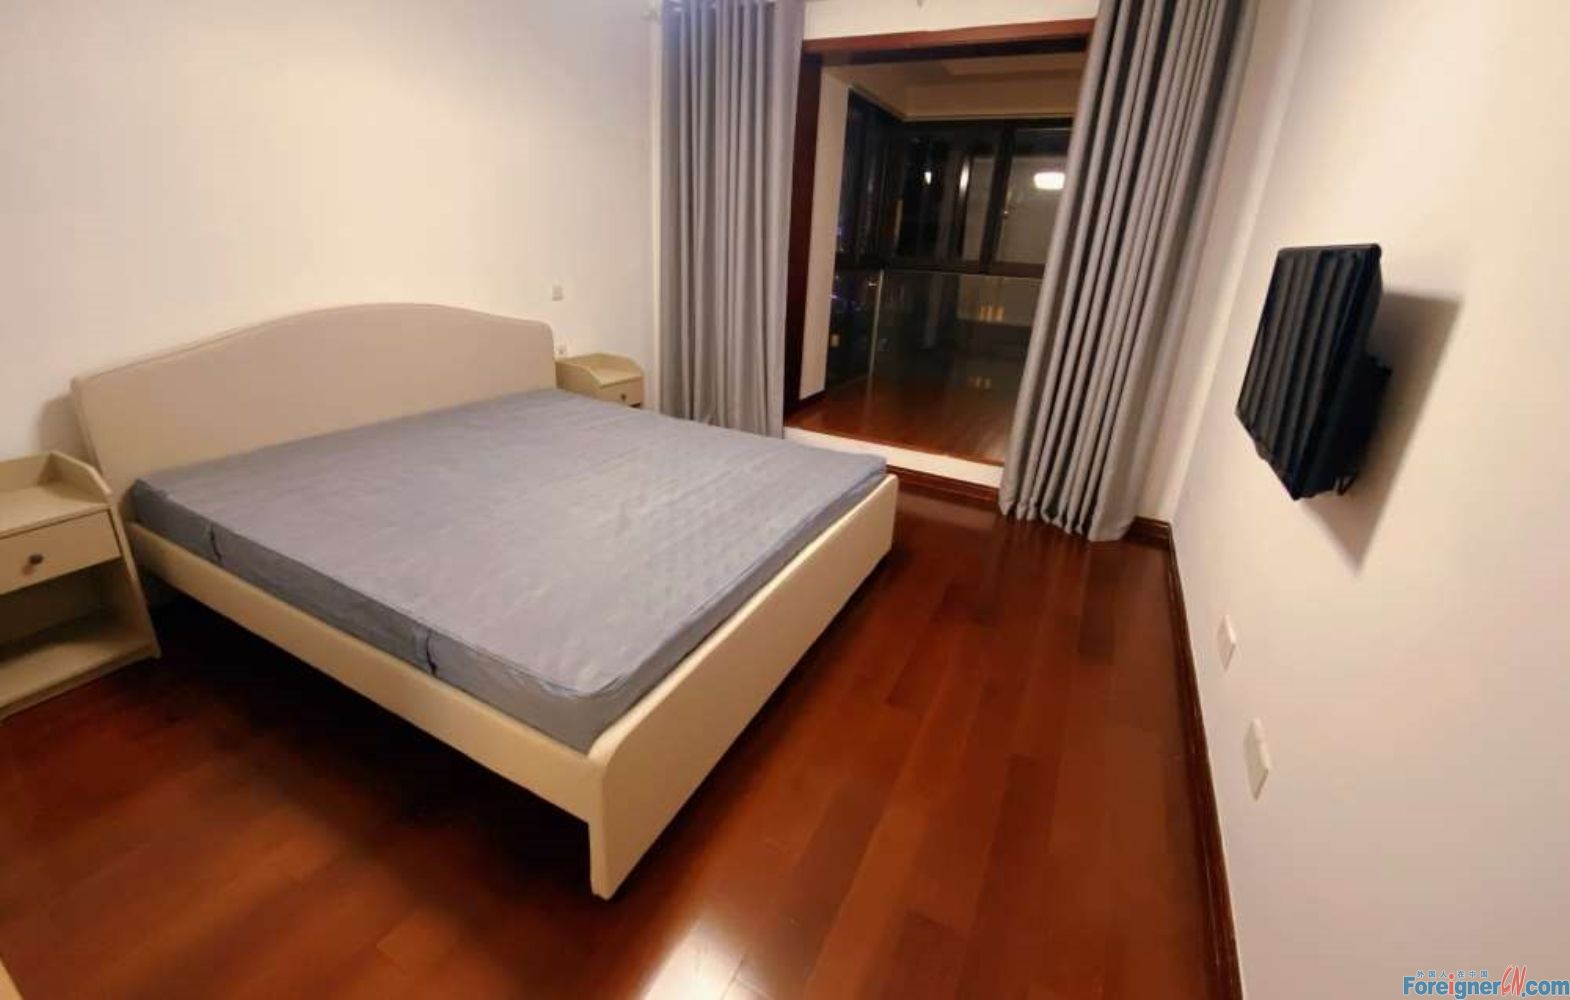 Fabulous！！！ House to rent in Suzhou / 3 bedrooms and 1 bathroom/Warm rooms/Jinji lake Nearby/Subway station 